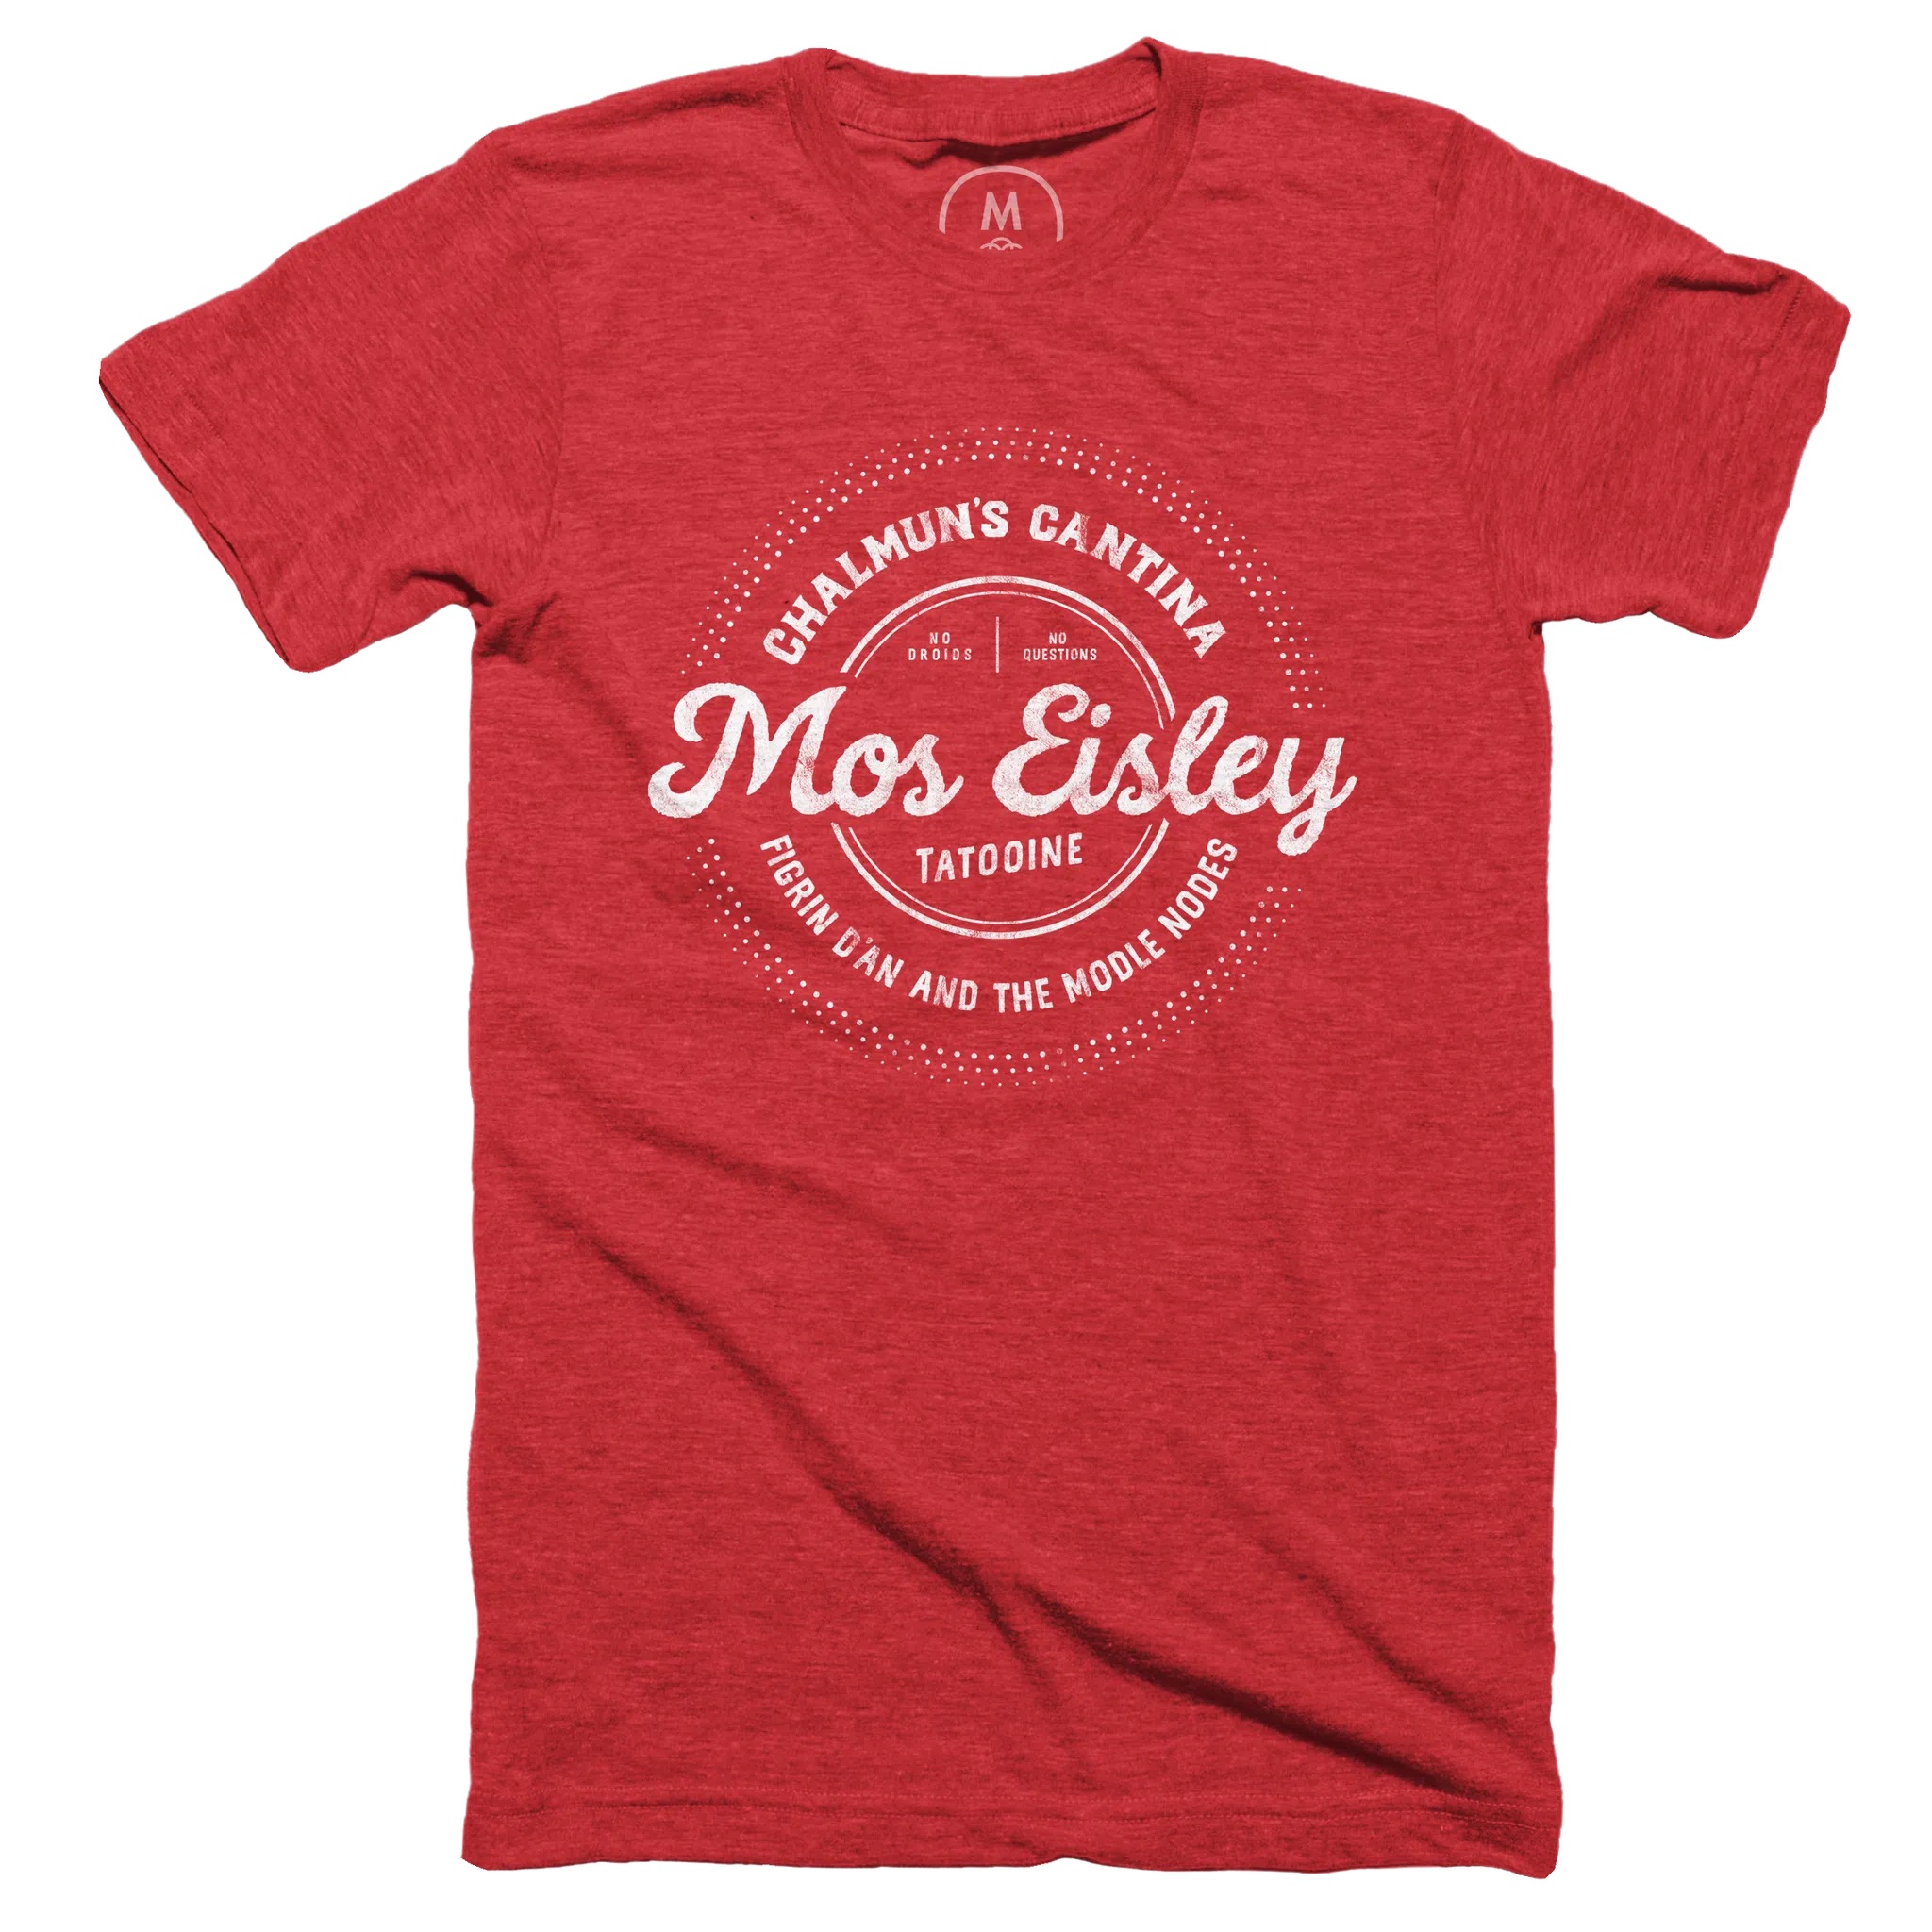 Mos-Eisley_-red-T